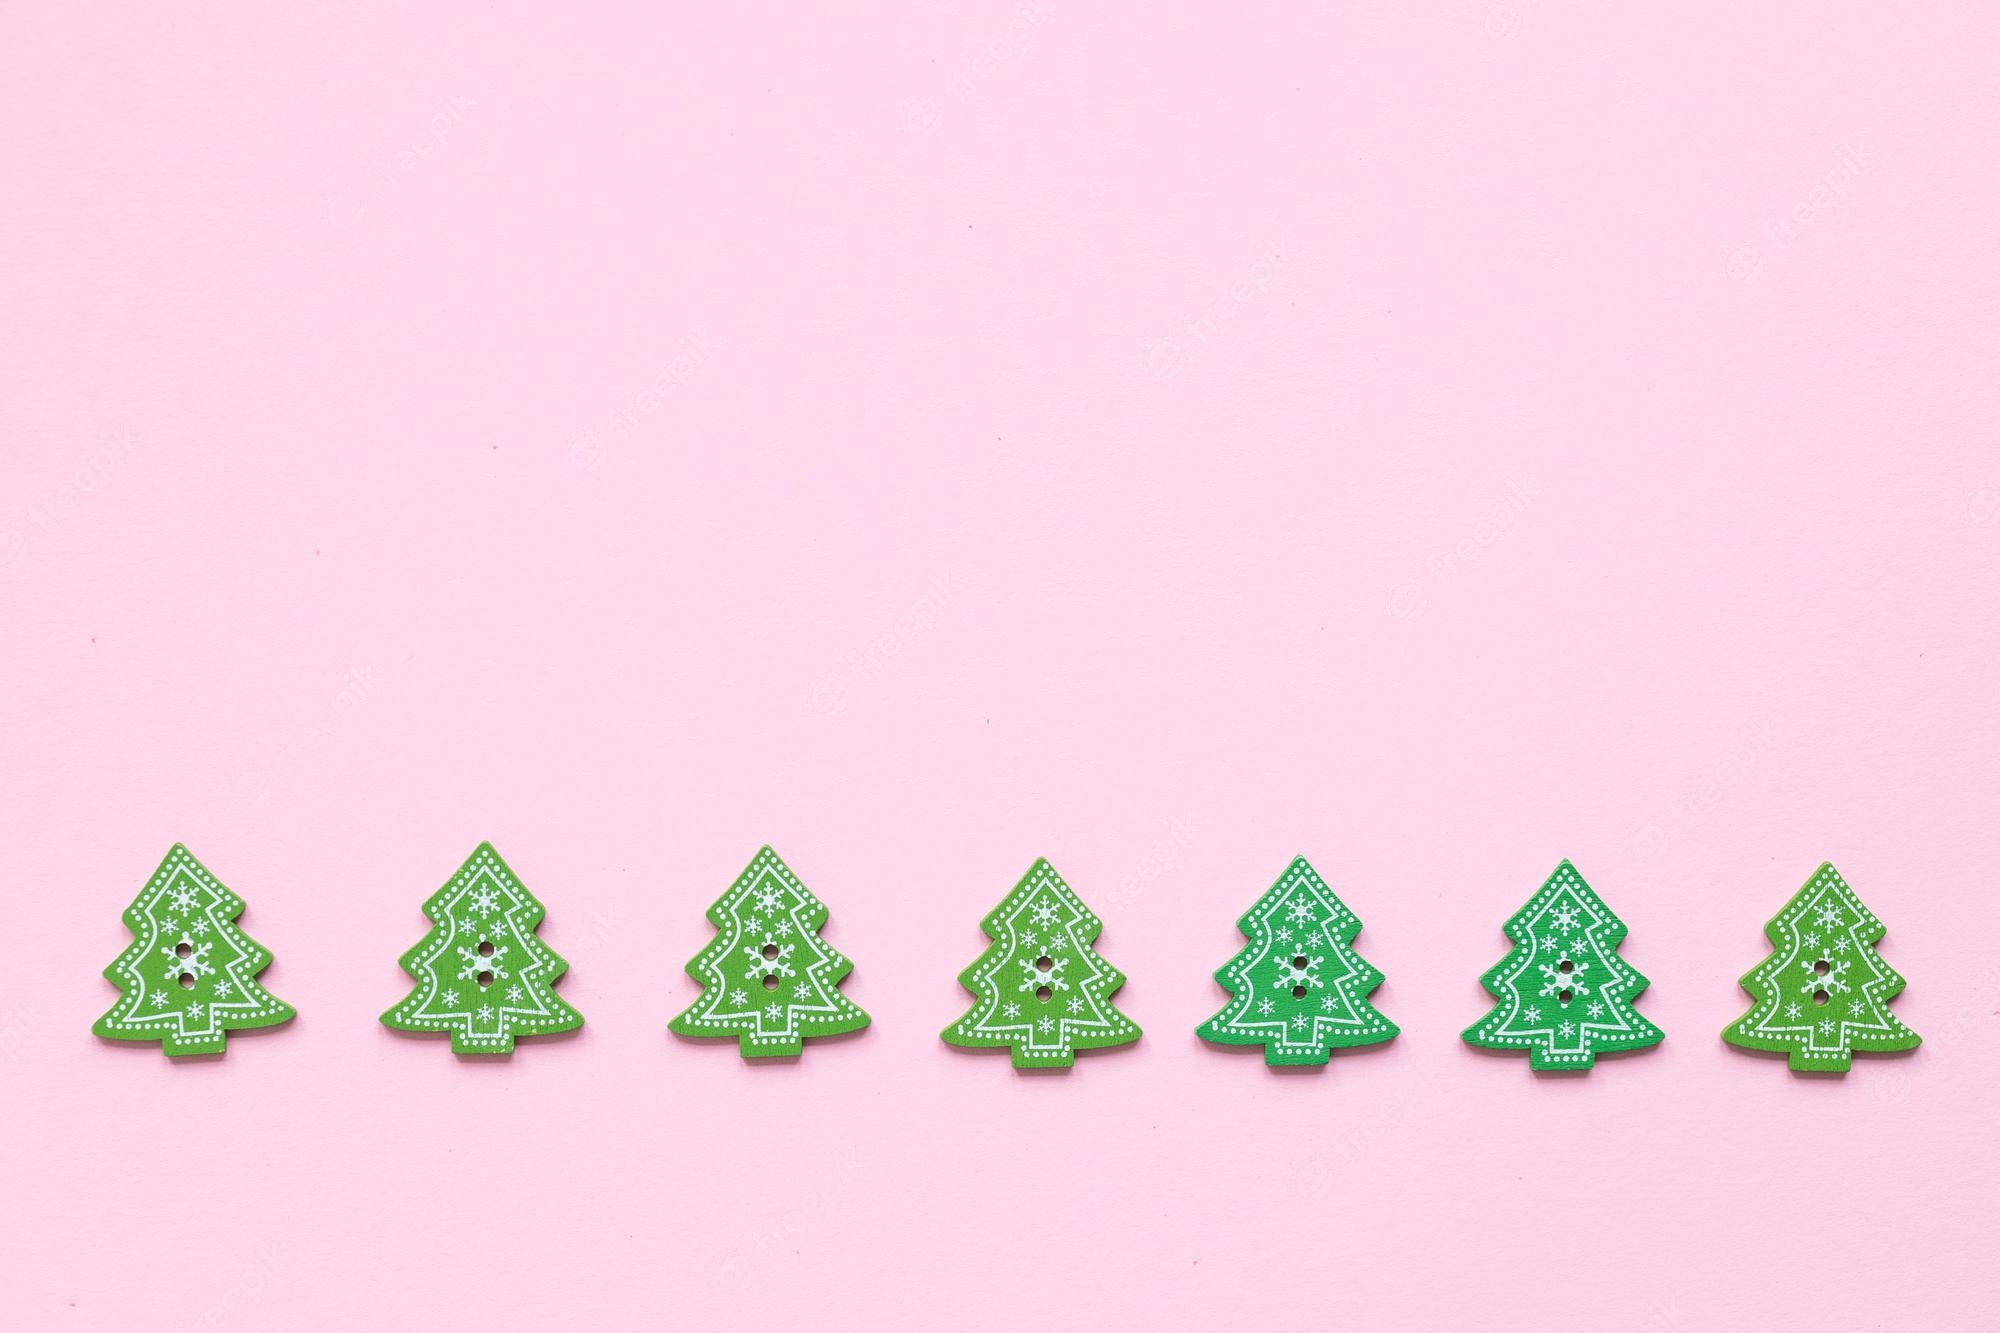 Premium Photo. Green wooden figures in the form of christmas tree on a pink background